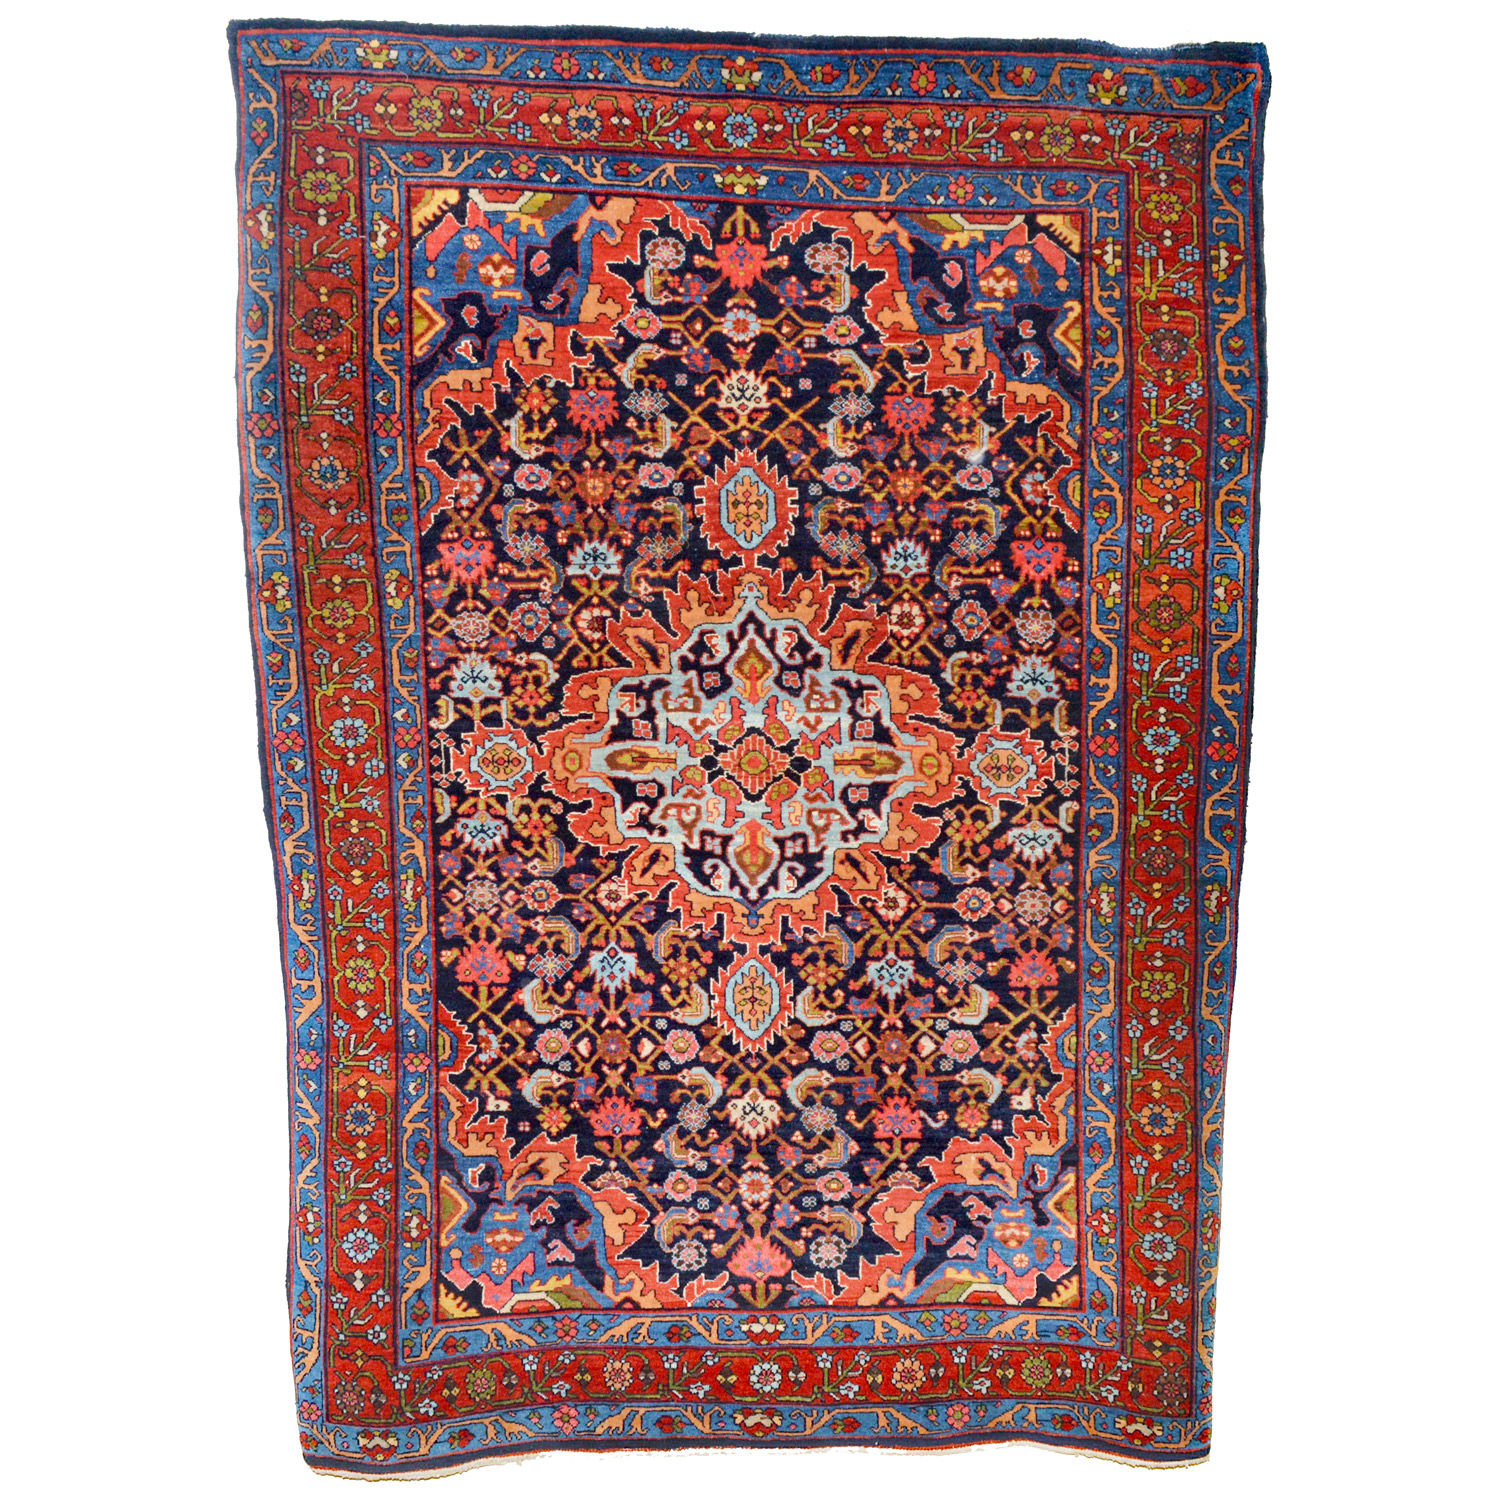 An antiquePersian Bidjar rug, with a sky blue and red medallion on a navy blue field that is decorated with the classical "Herati" design, northwest Persia, Kurdistan province, circa 1910 - Douglas Stock Gallery, antique Oriental rugs Boston,MA area, antique rugs New England, antique rugs New York